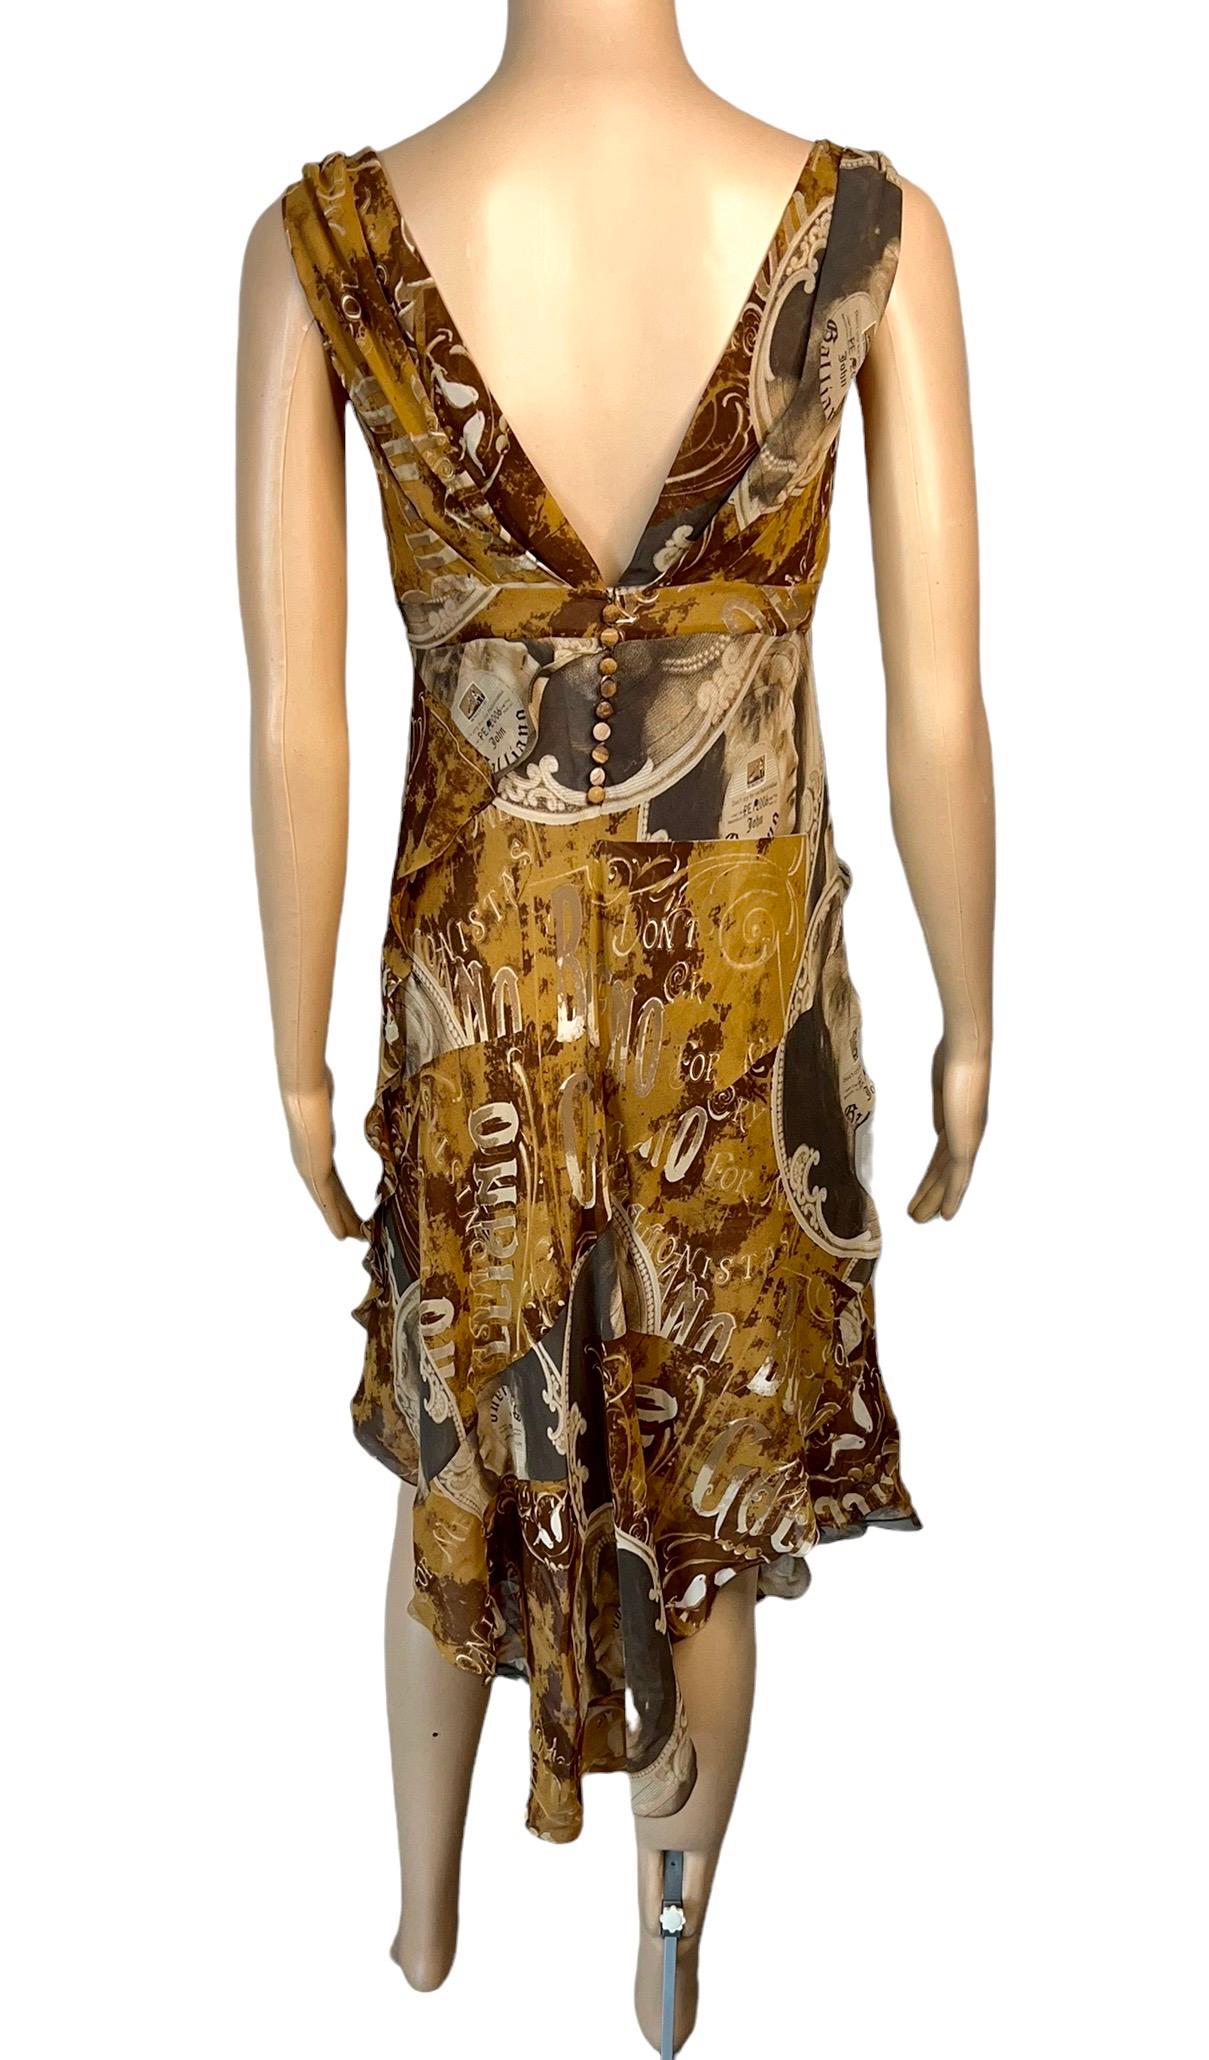 John Galliano S/S 2006 Newspaper Print Plunging Neckline Silk Evening Dress In Good Condition For Sale In Naples, FL